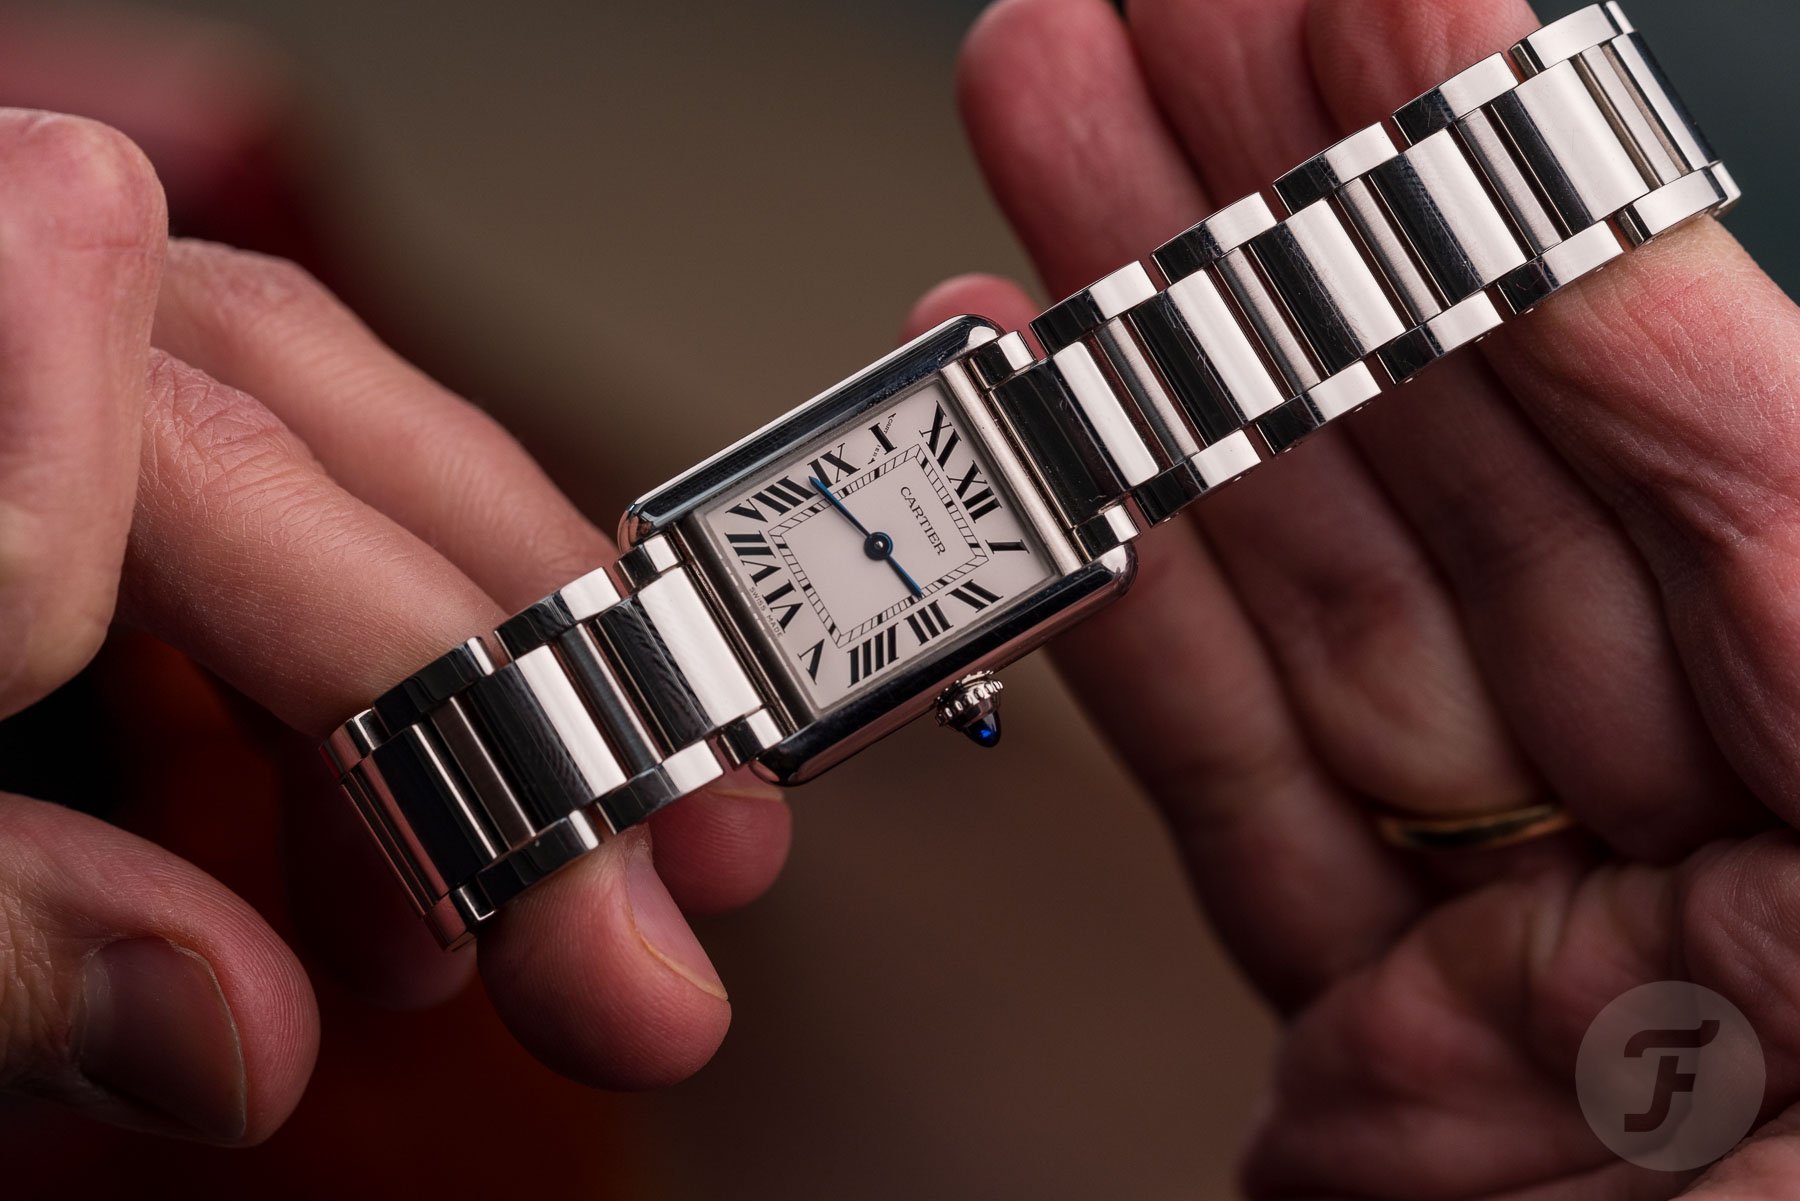 Introducing: The SolarBeat Tank Must, The First-Ever Solar-Powered Cartier  Watch - Hodinkee